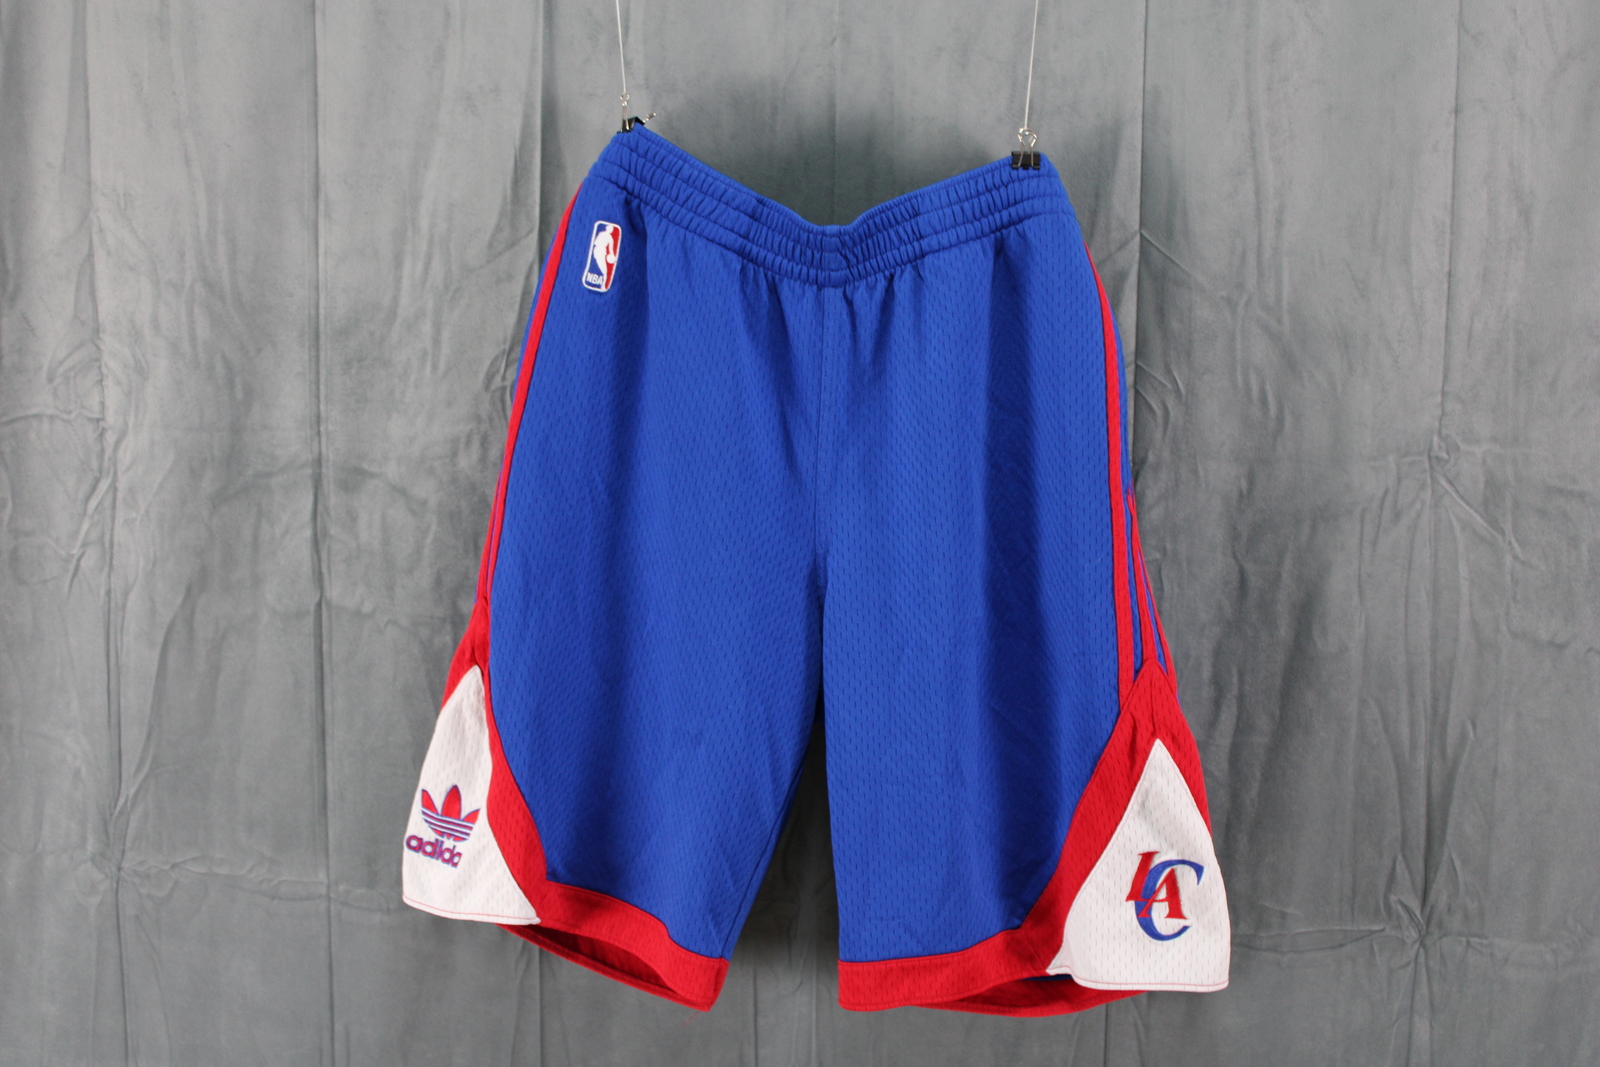 Los Angeles Clippers Shorts (Retro) - Crested Logos by Adidas - Men's XL - $55.00